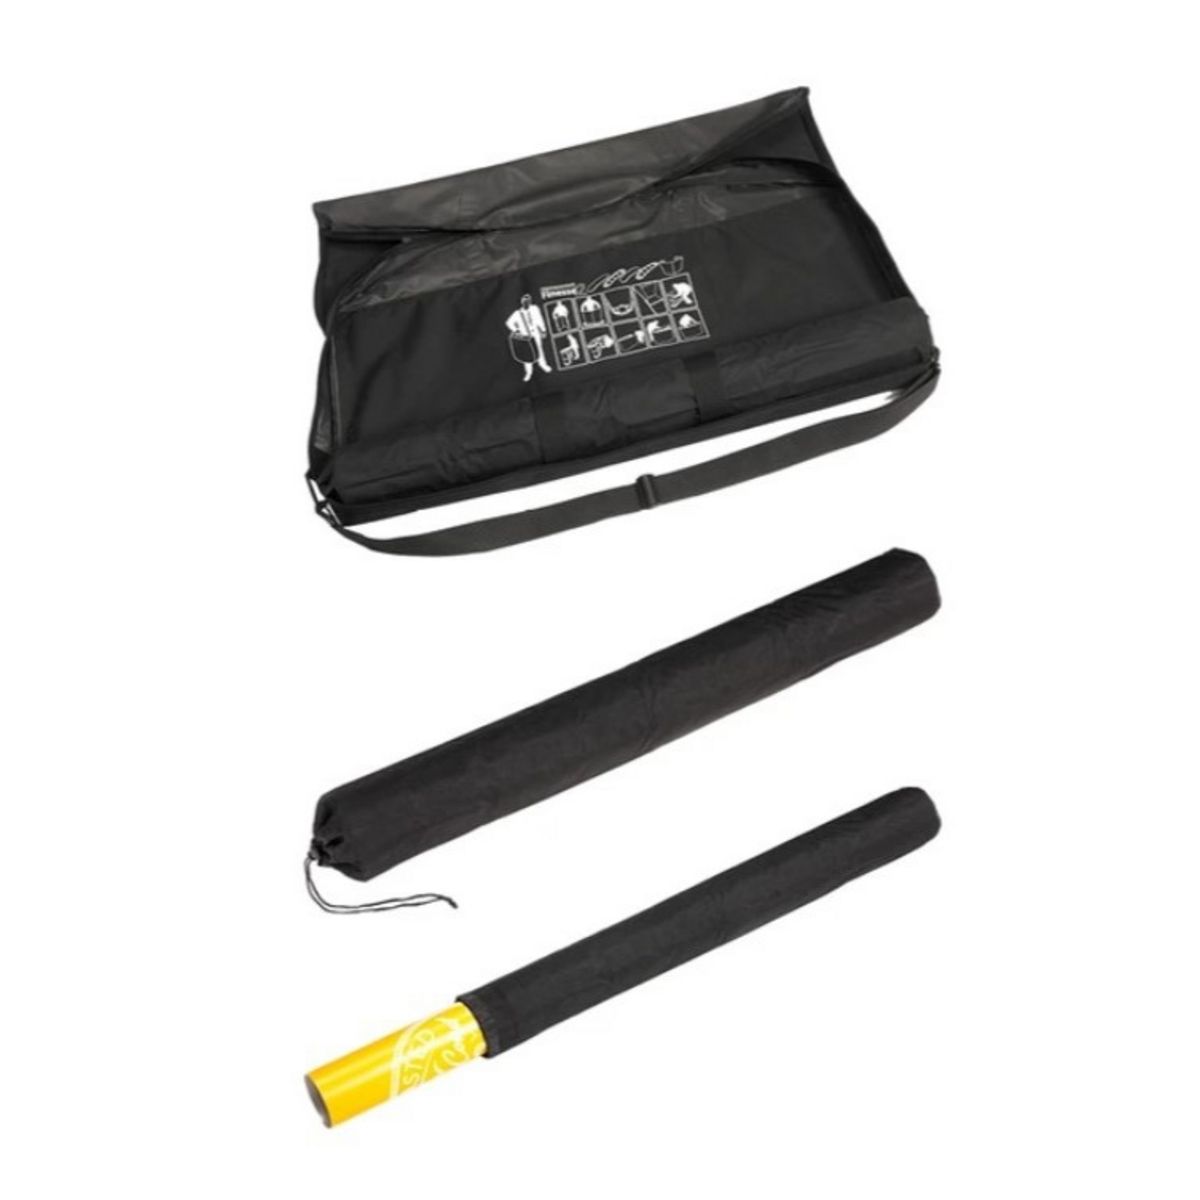 Finesse2 carry bag, graphic tube and bag.jpg